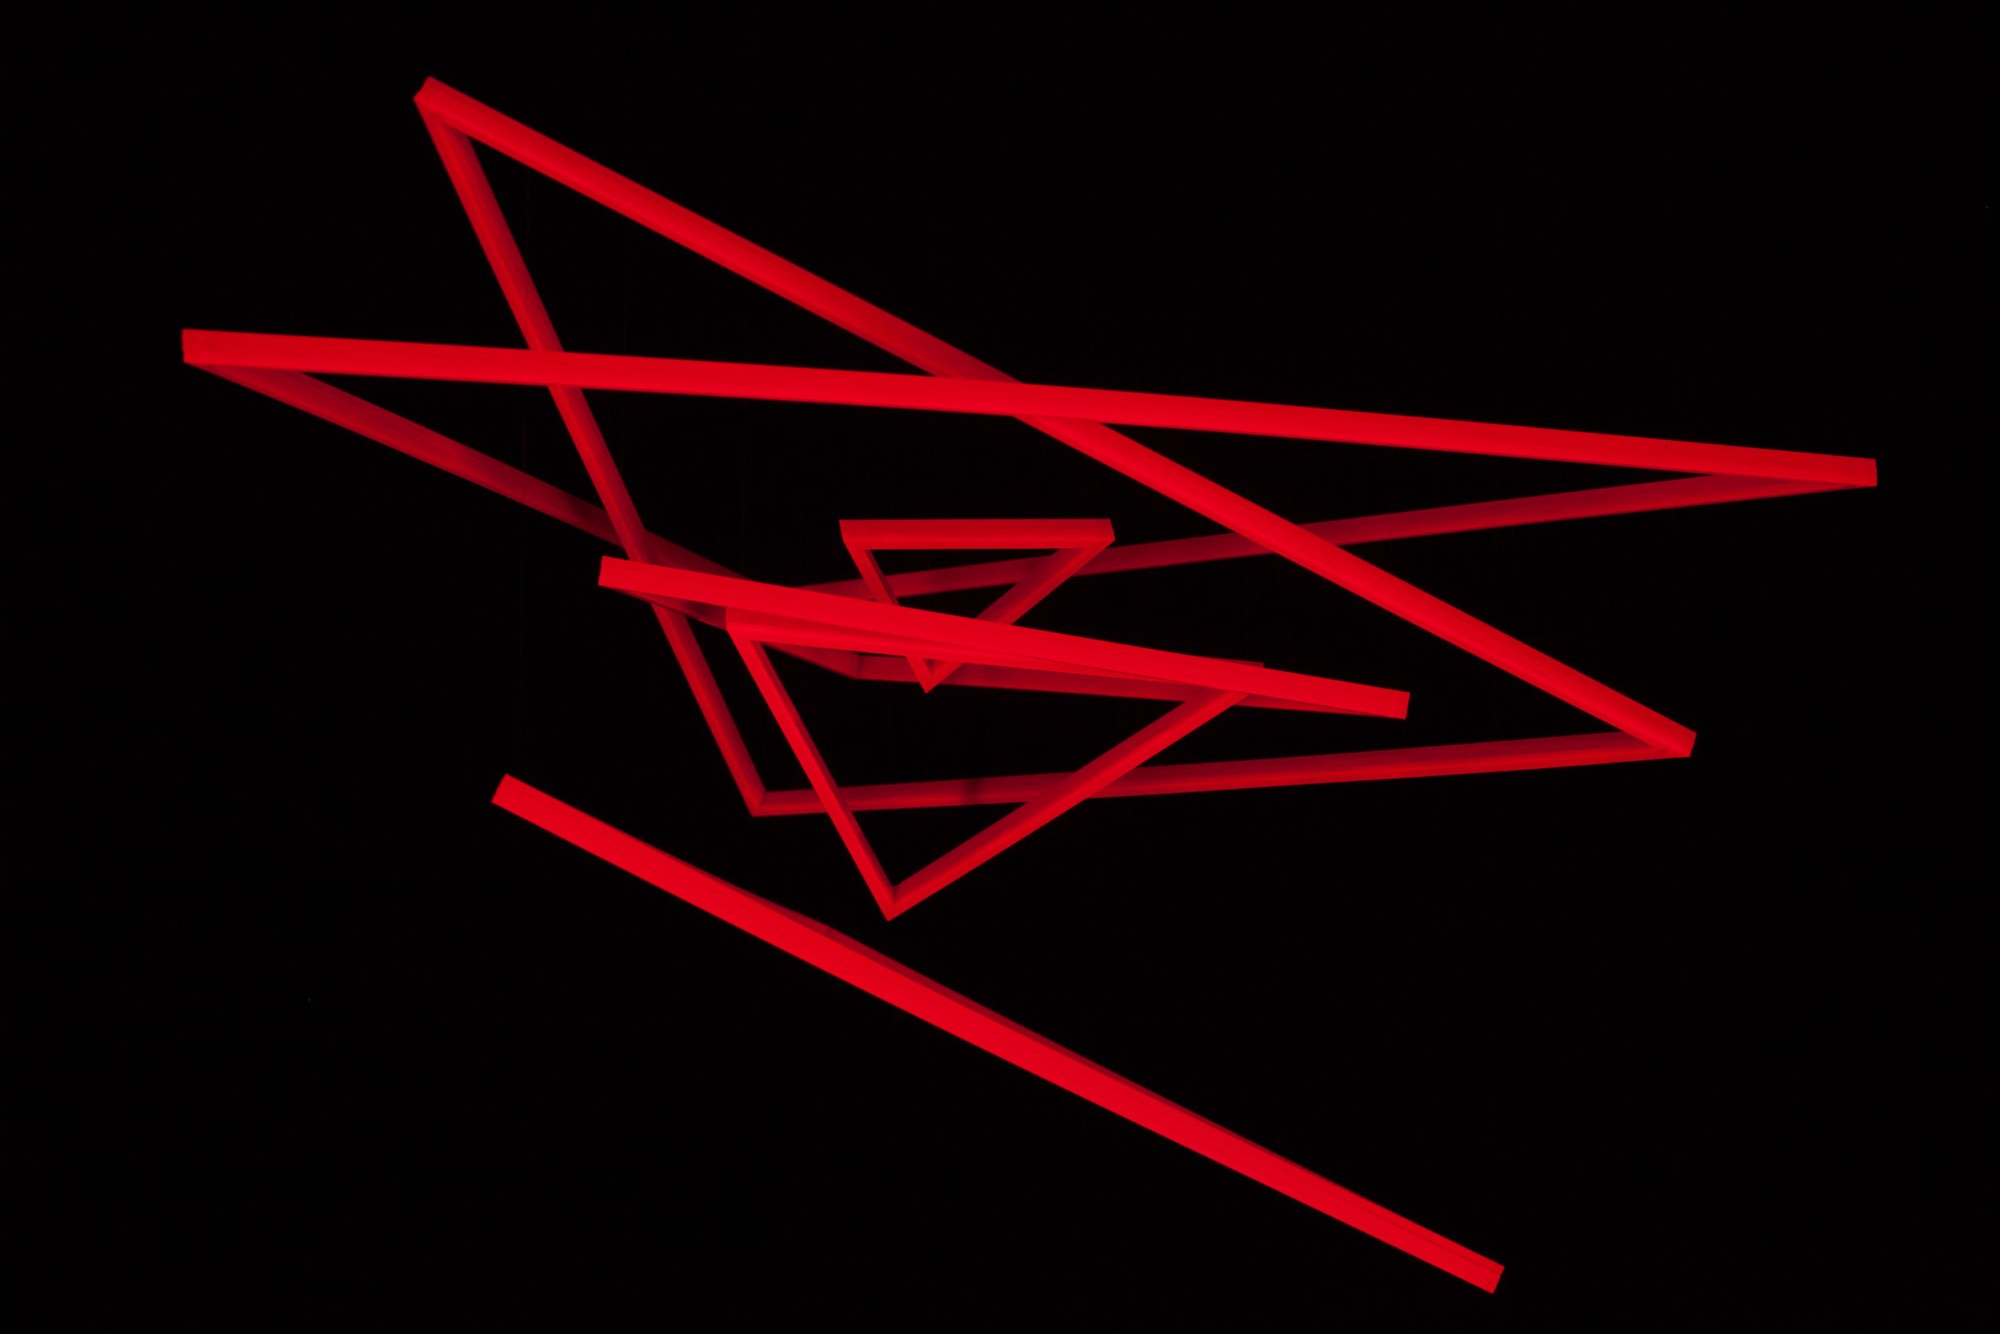 Trianguconcentricos_Rouge_Fluo_2.jpg